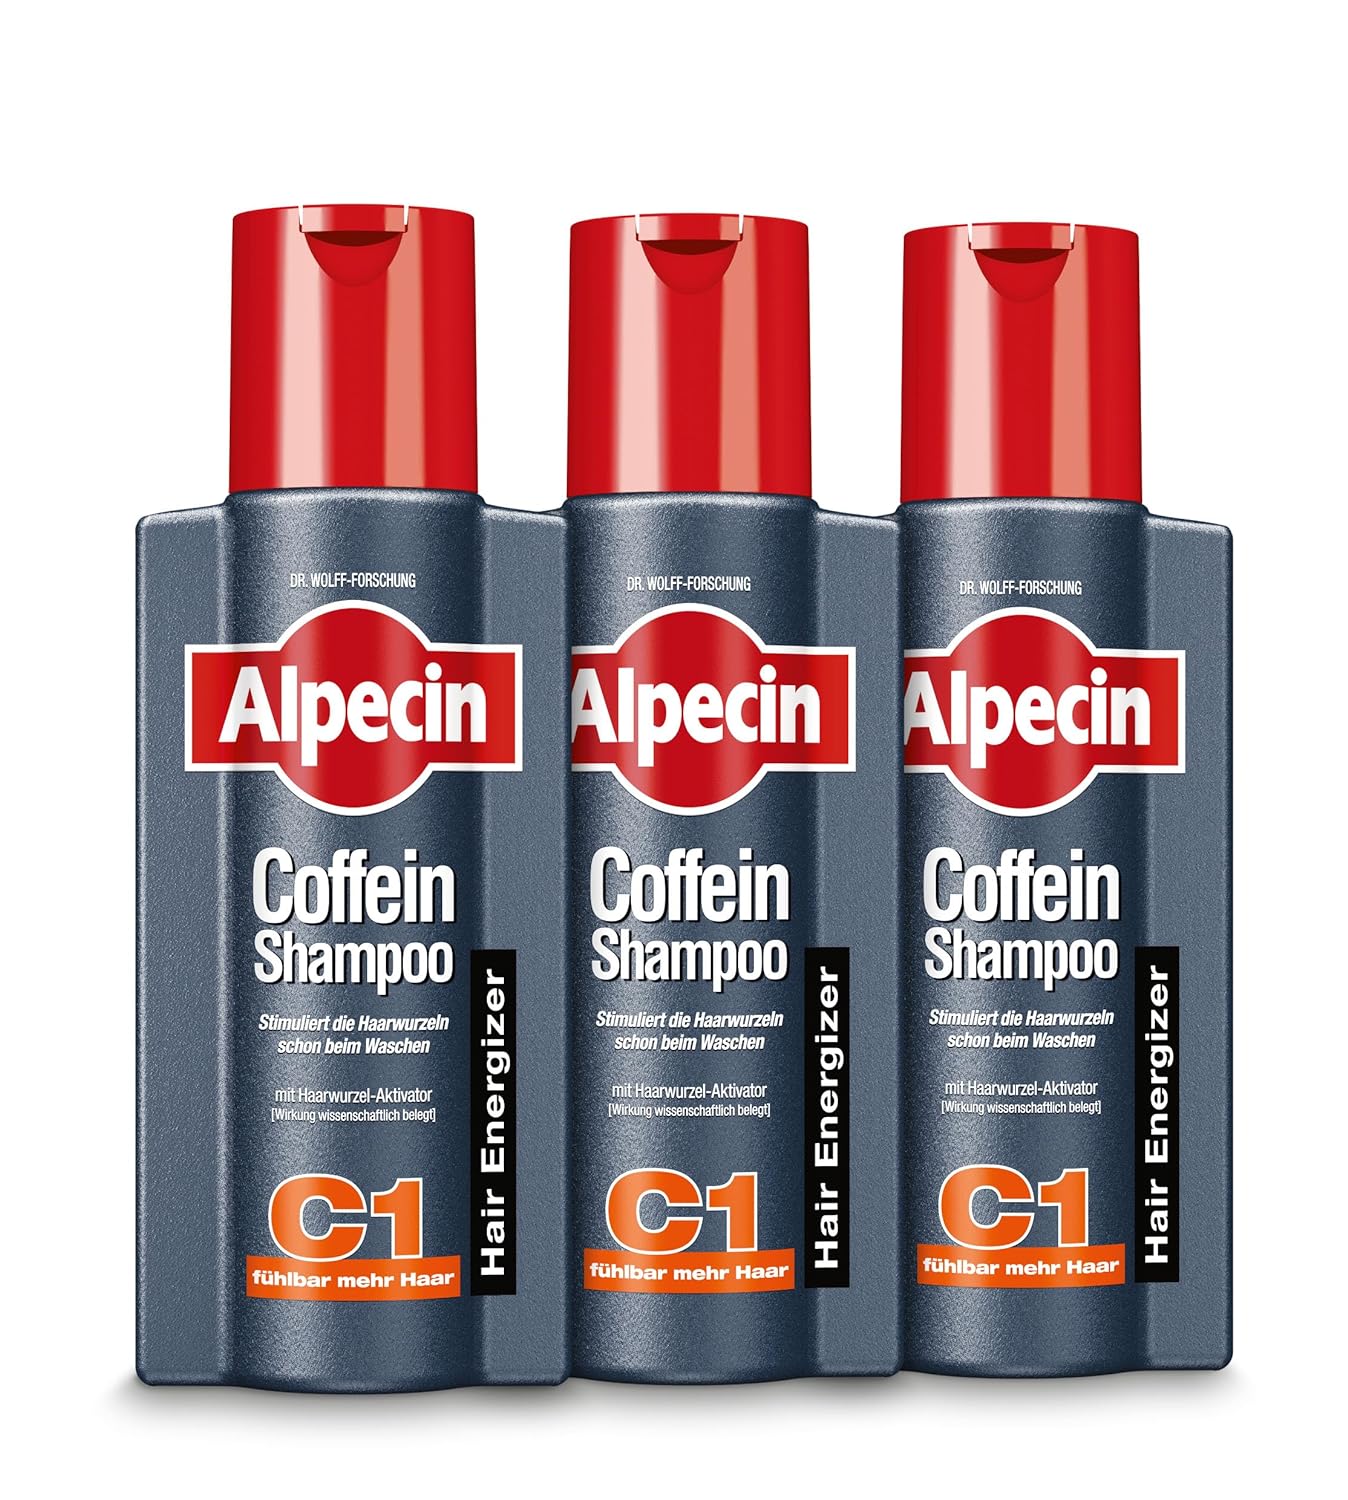 Alpecin Caffeine Shampoo C1-3 x 250 ml - Against Hereditary Hair Loss | Noticepably More Hair | Strengthens Hair Roots and Hair Growth | Hair Care for Men Made in Germany